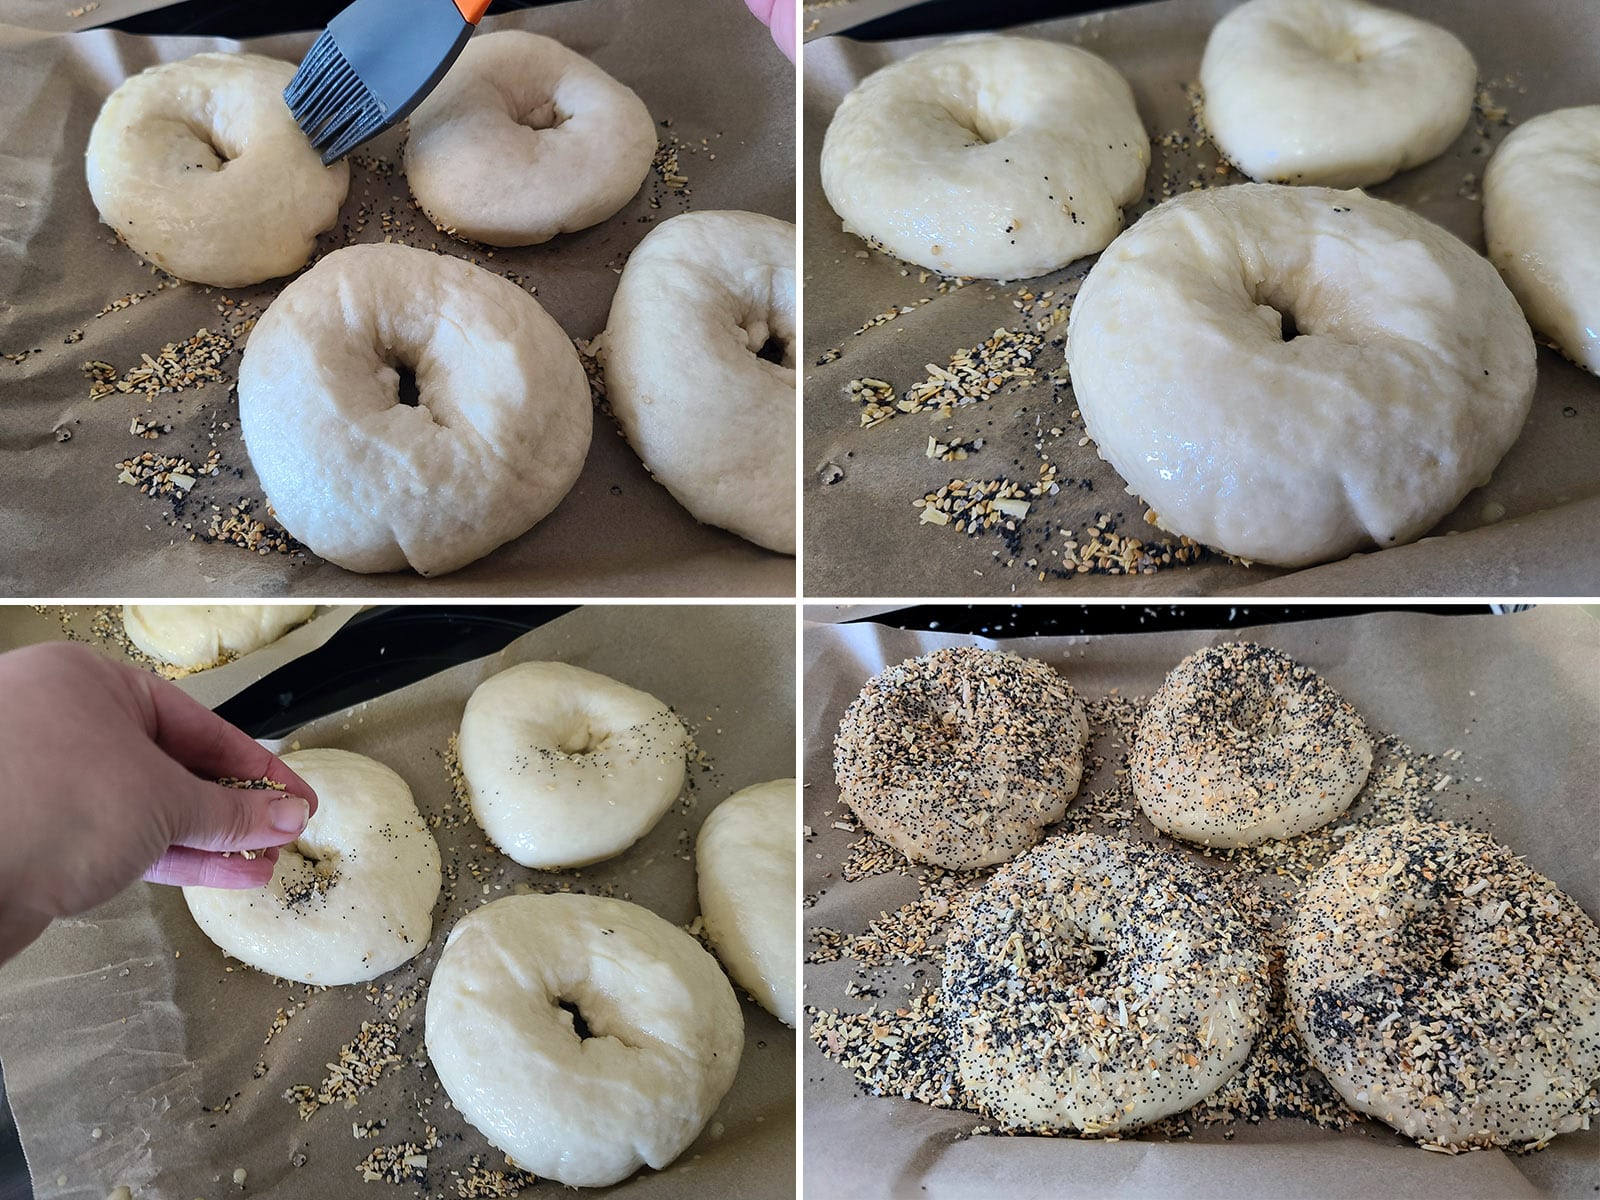 A 4 part image showing the bagels being brushed with egg wash and sprinkled with everything seasoning.